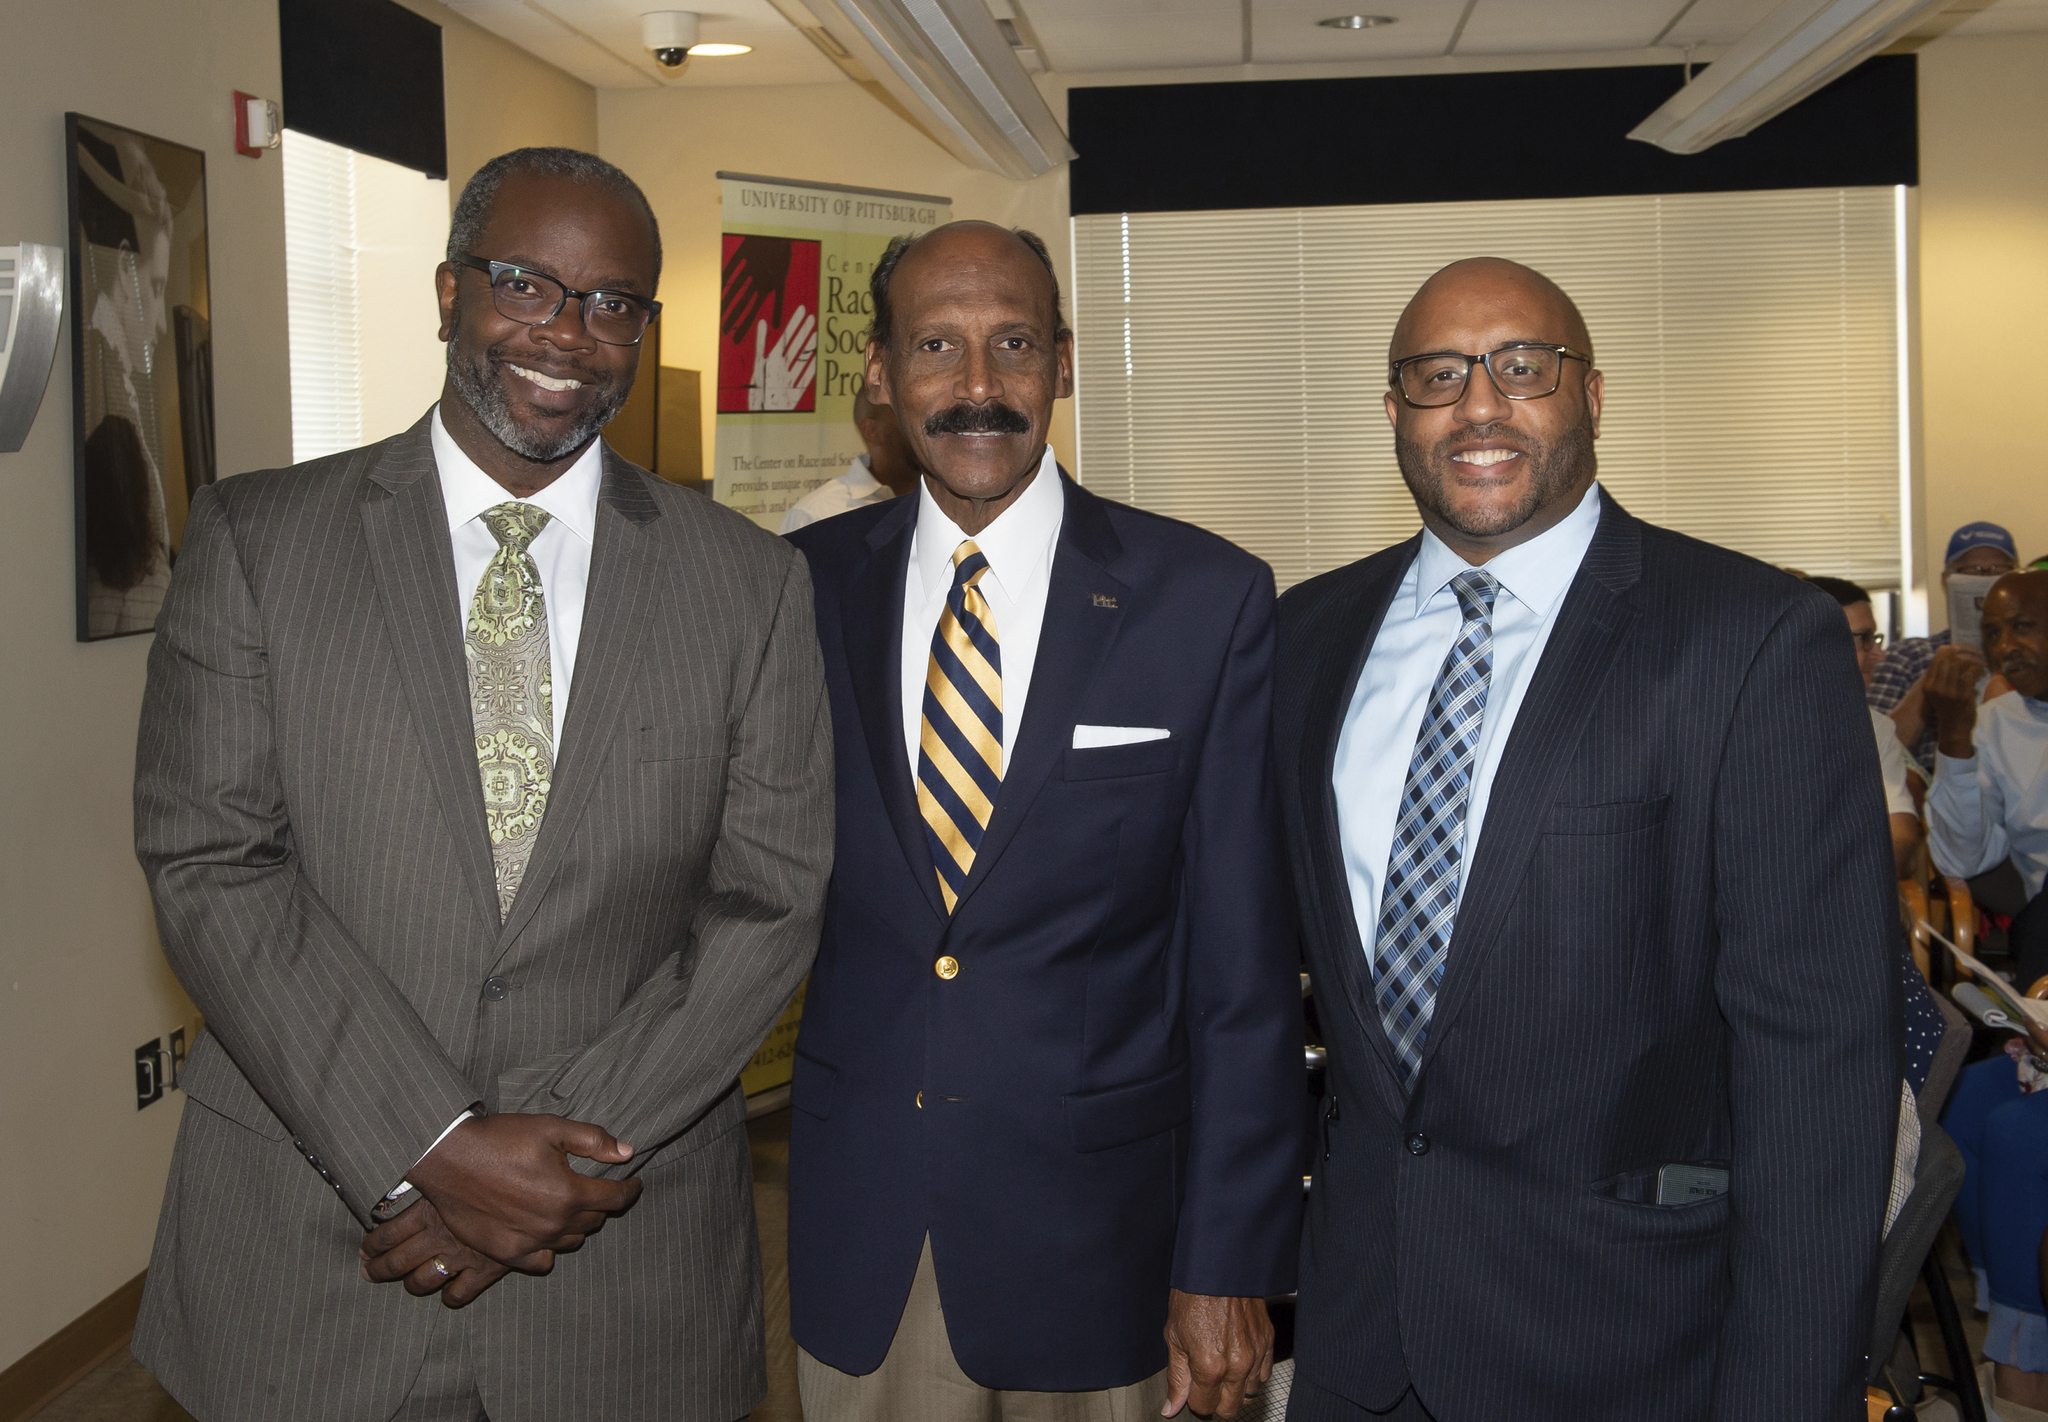 Dean Larry Davis with Vice Provost John Wallace and Dr. James Huguley